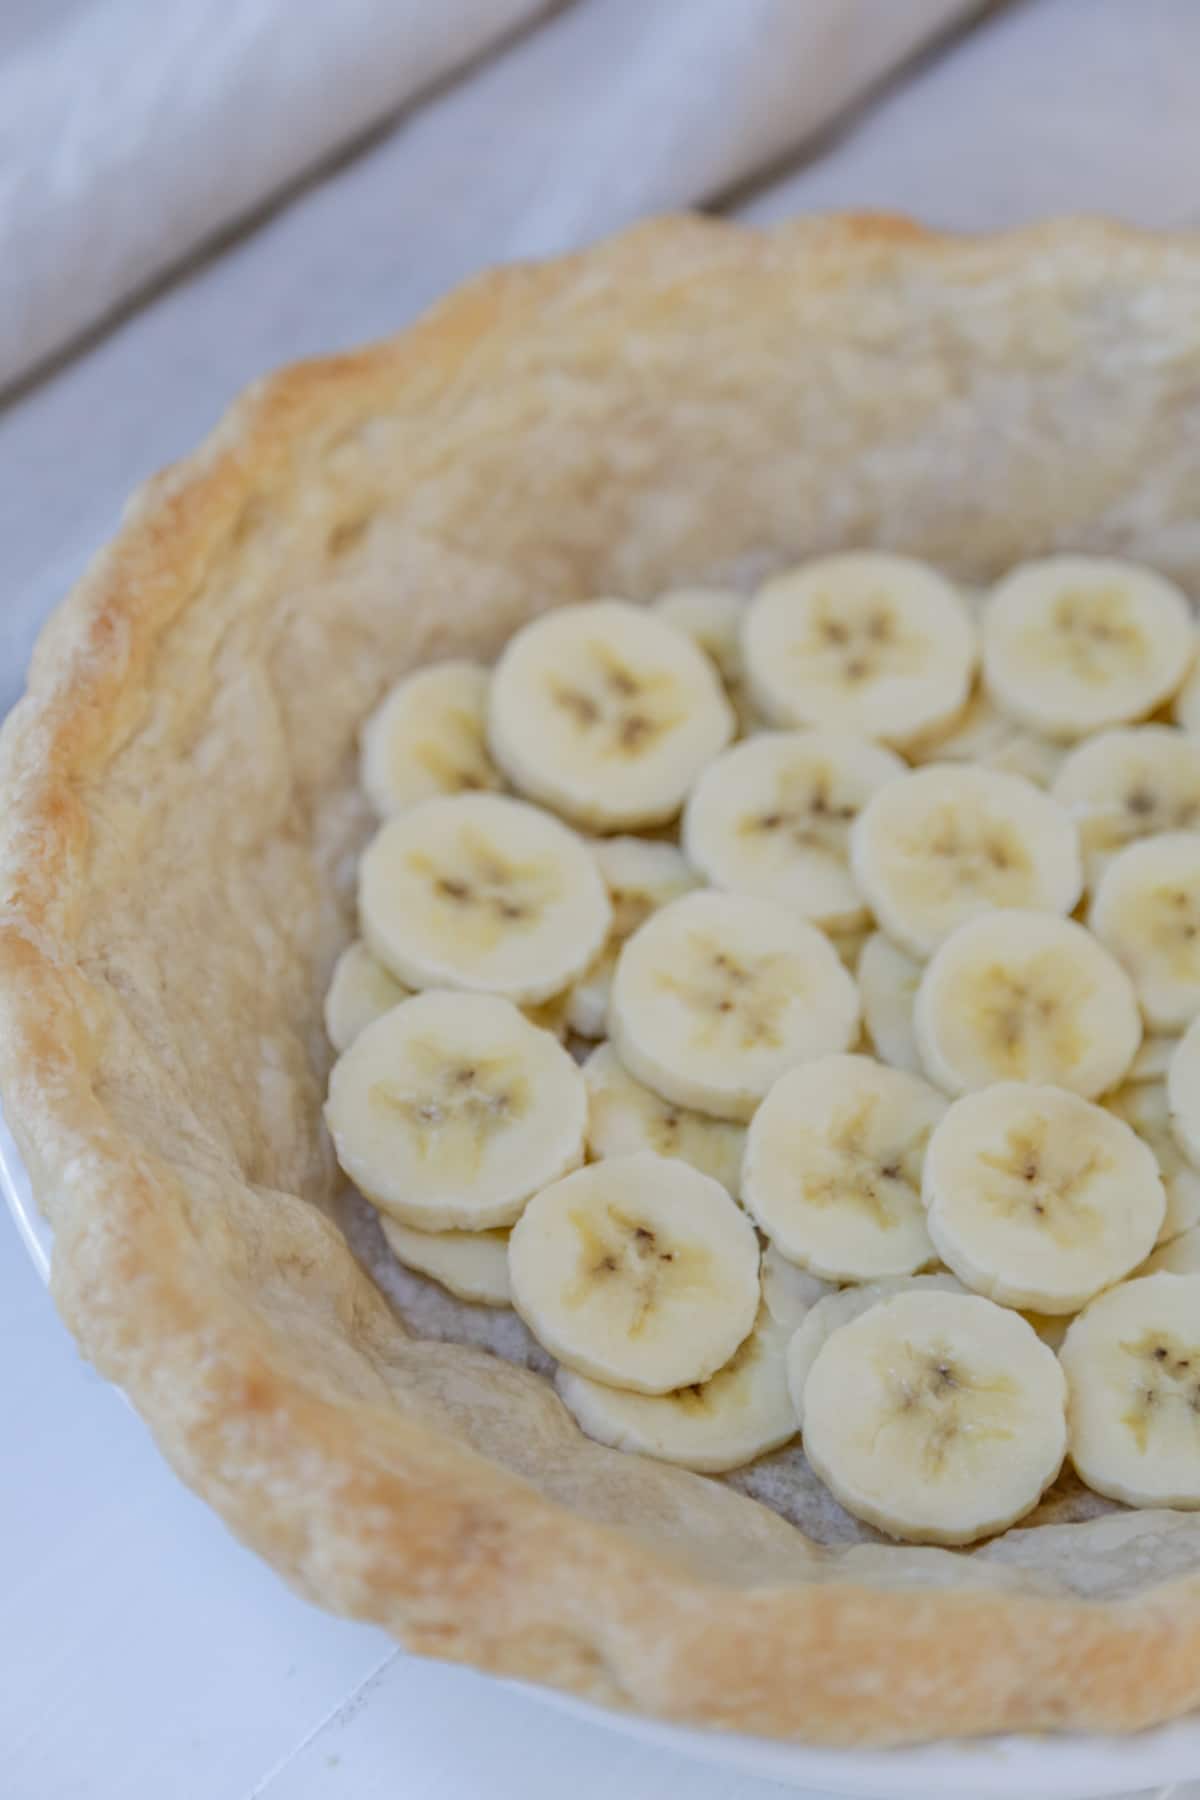 A baked pie crust with a layer of sliced bananas on the bottom of the crust.